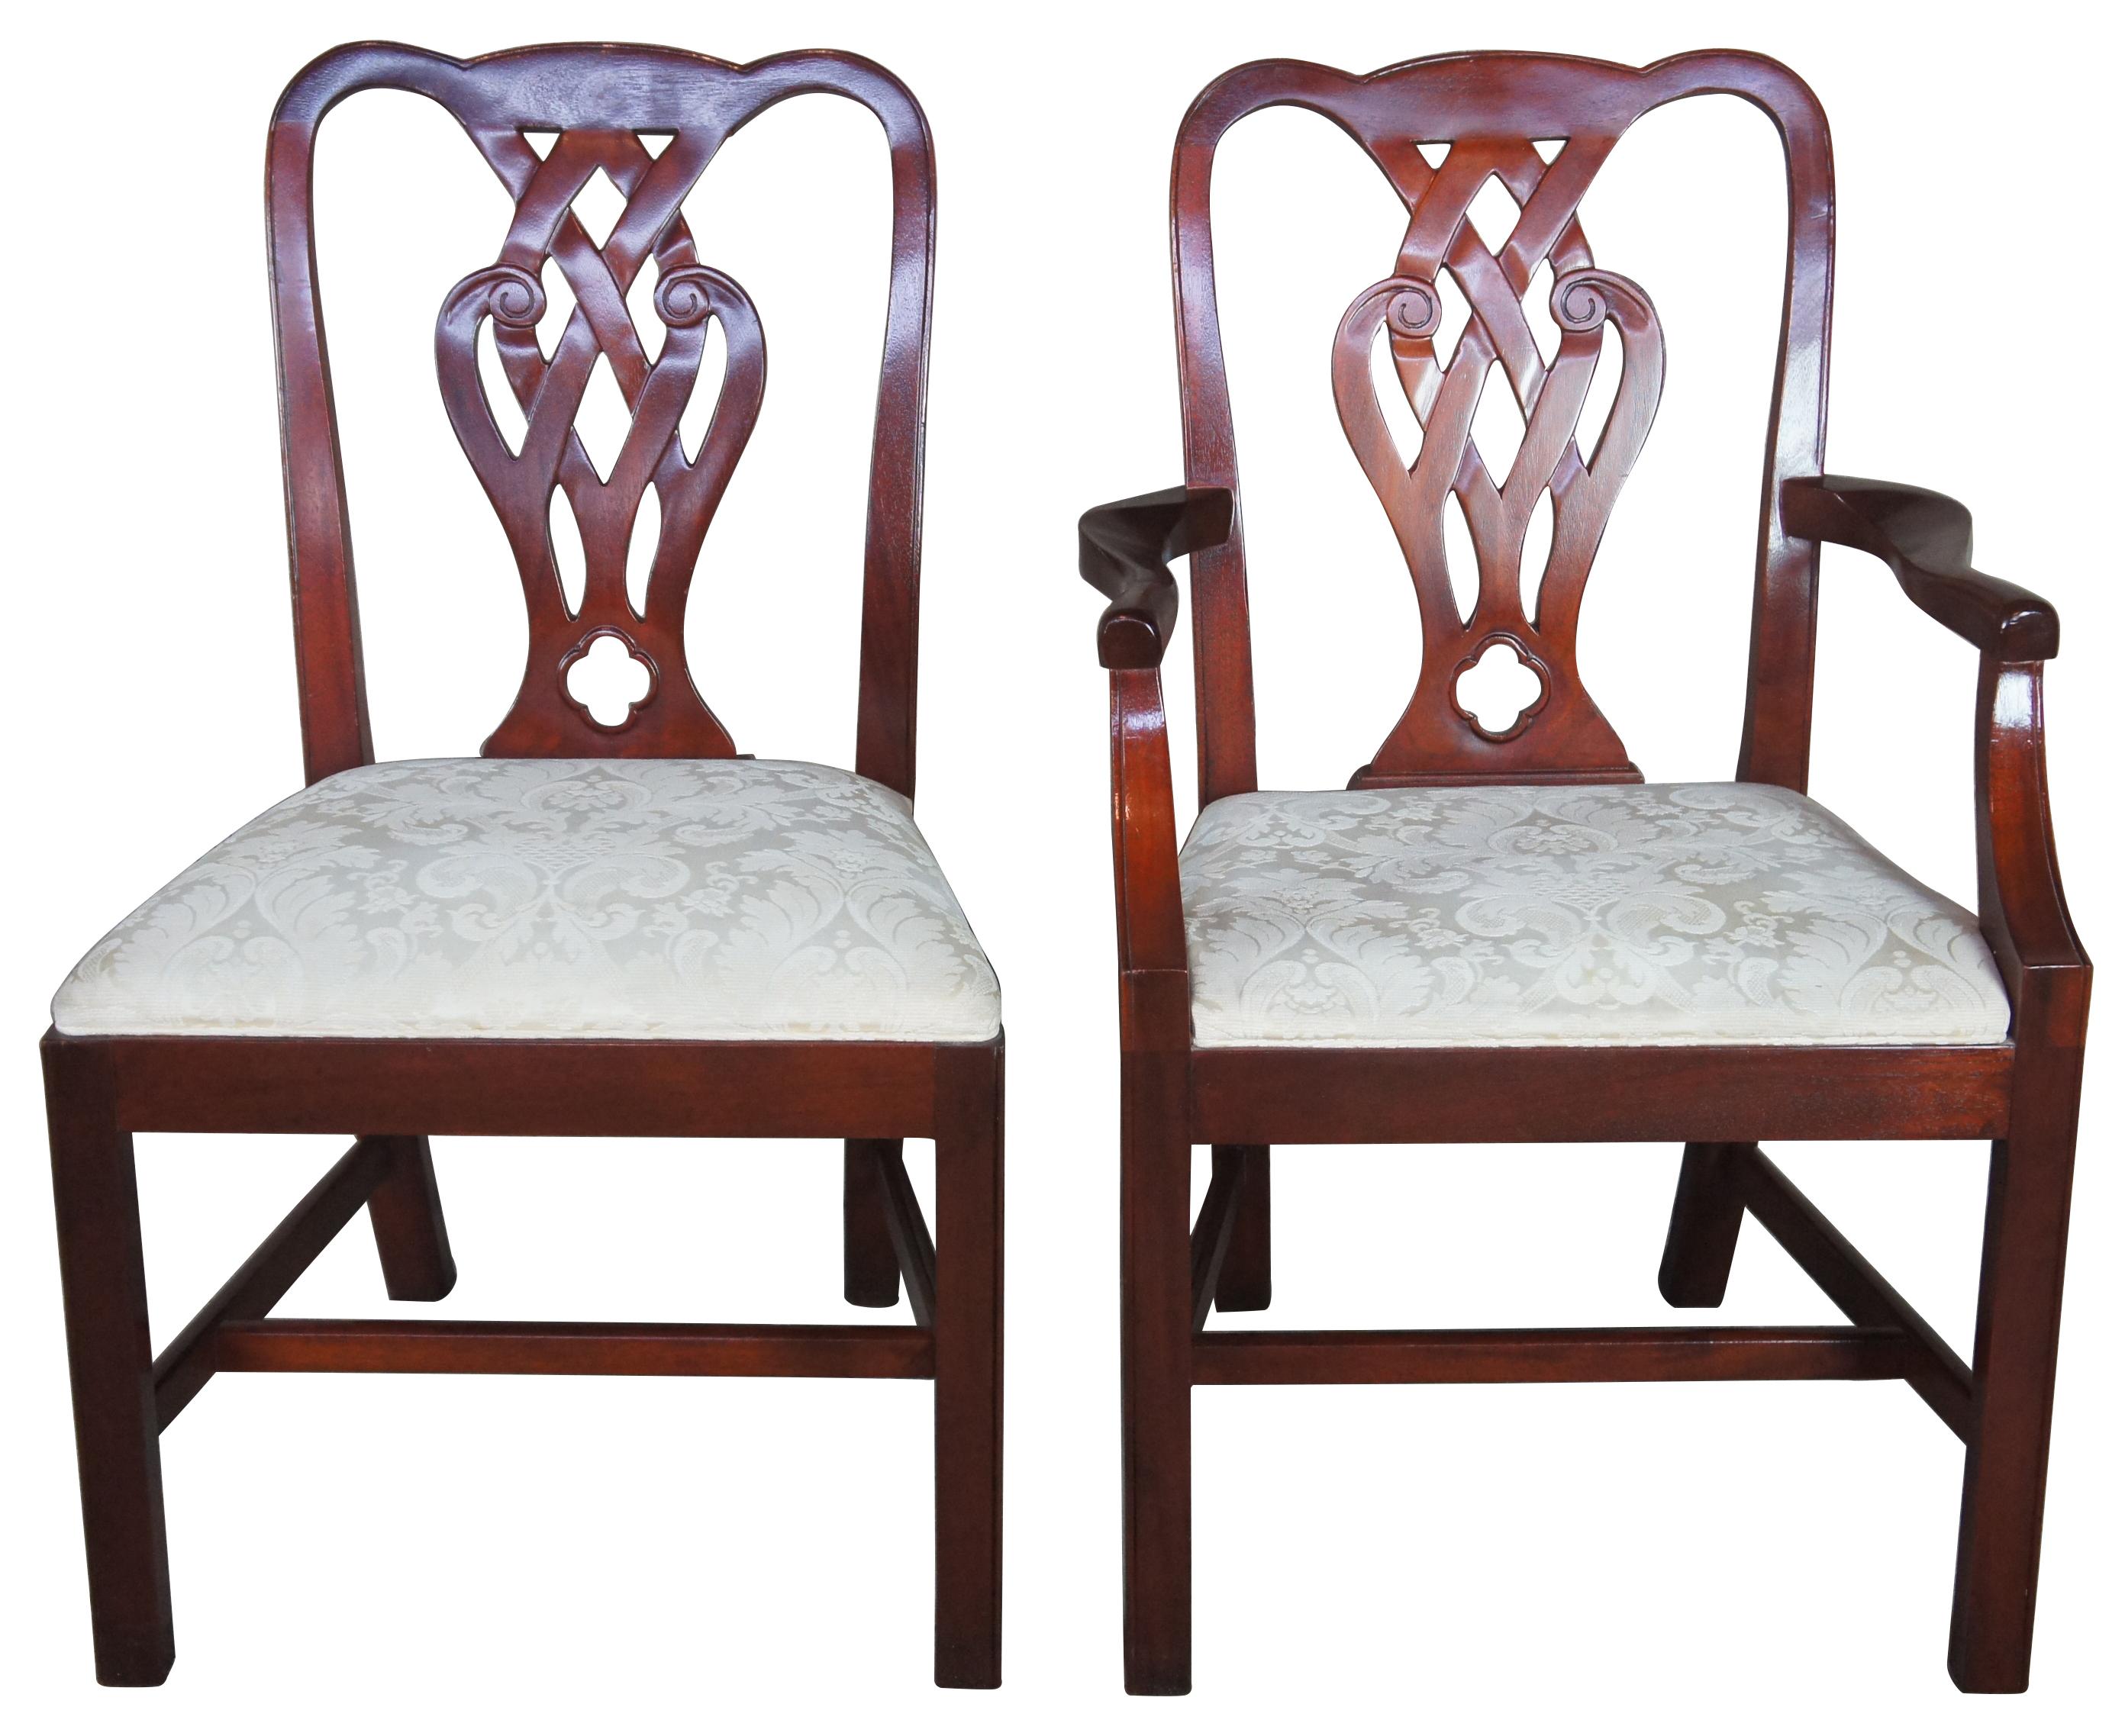 Baker dining chairs, circa 1980s. Made from mahogany with an interwoven pierced and carved back. Features a brocade upholstered white seat. Includes 2 arms and 2 sides.
    